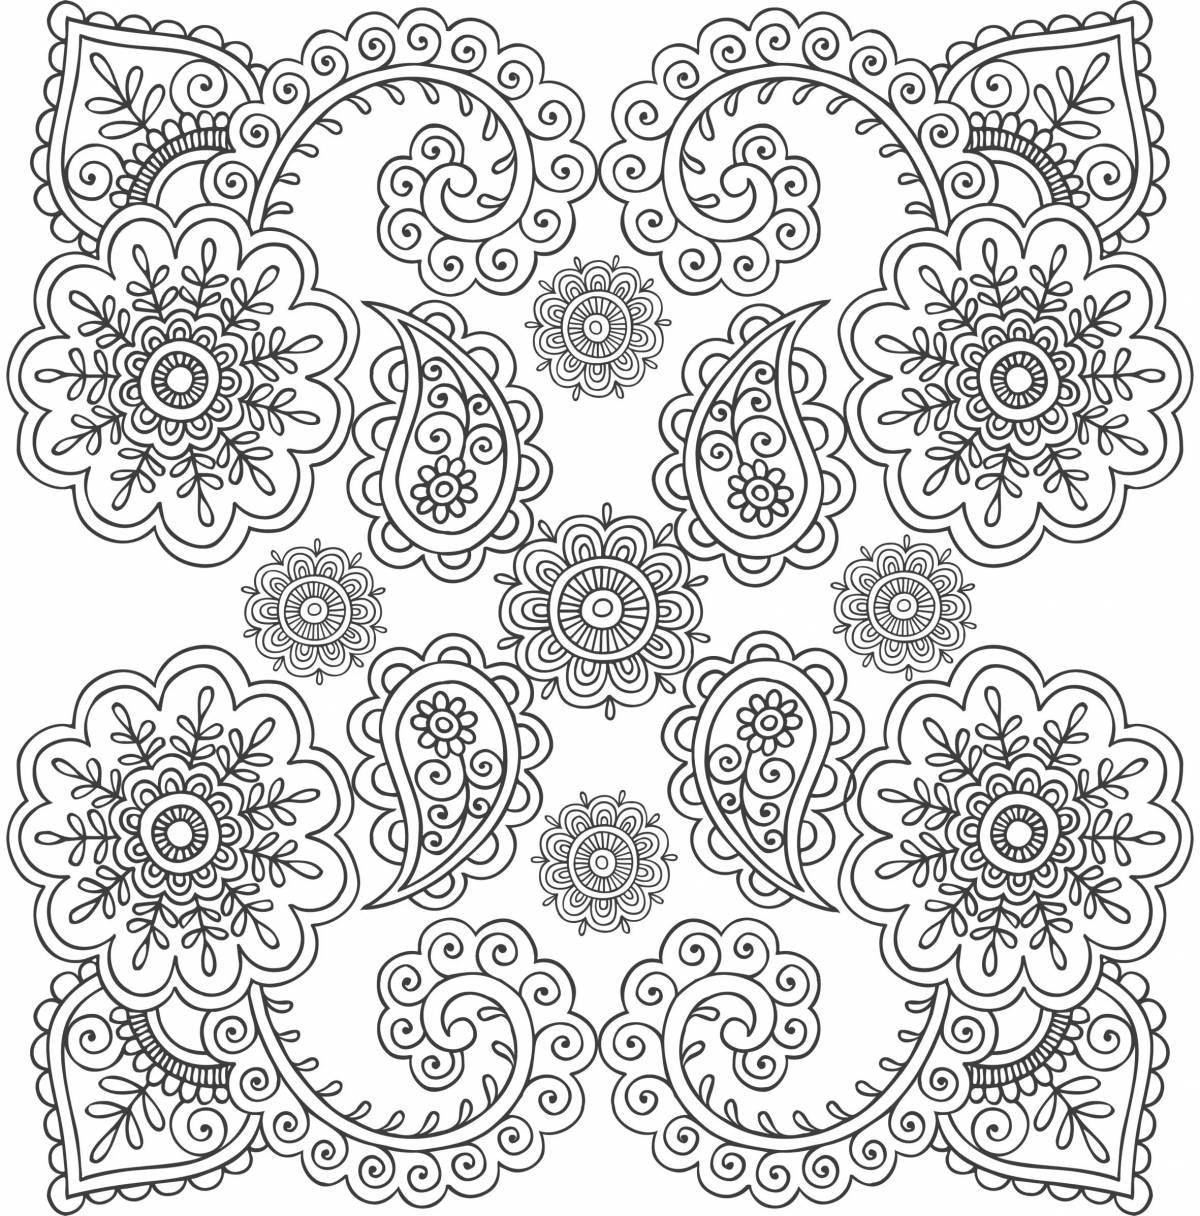 Glitter patterns and ornaments for coloring pages for children